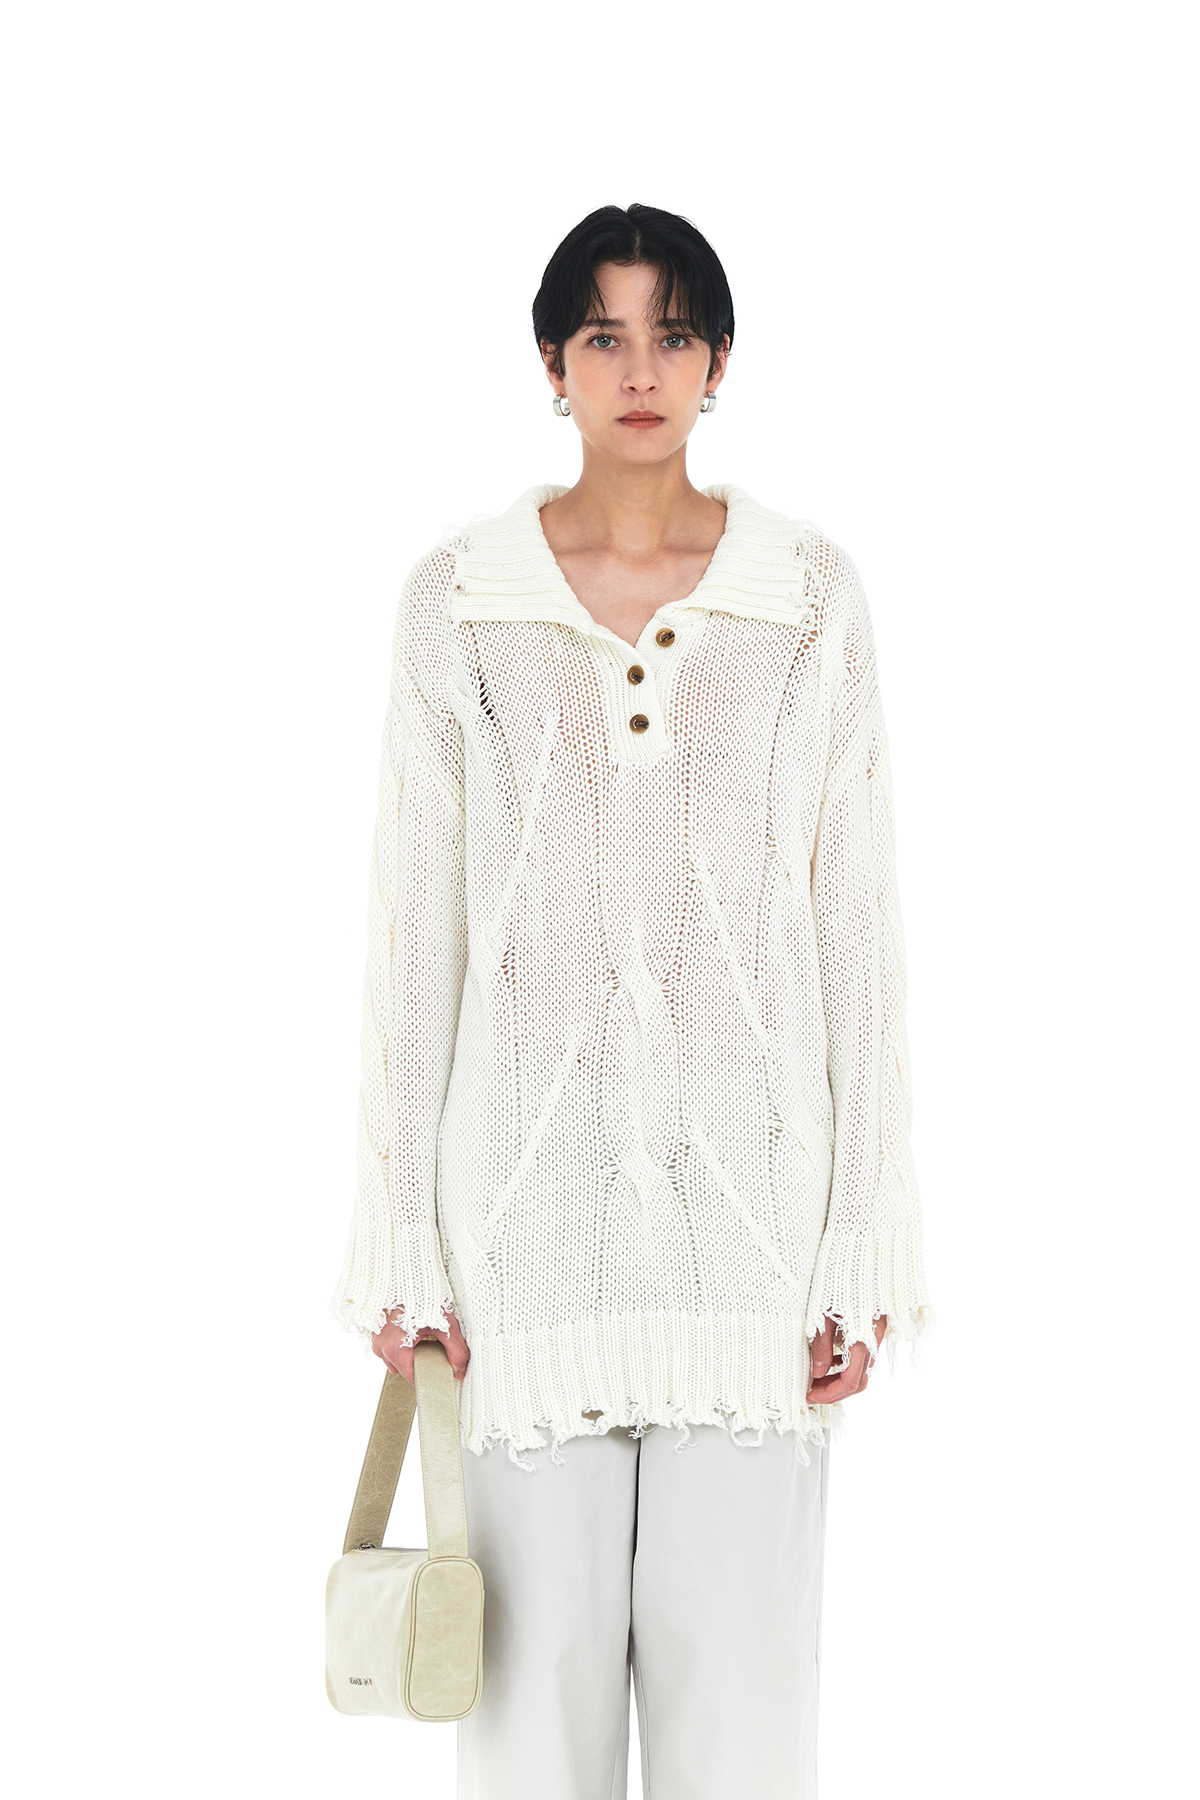 CABLE ROUGH KNIT PULLOVER IN IVORY